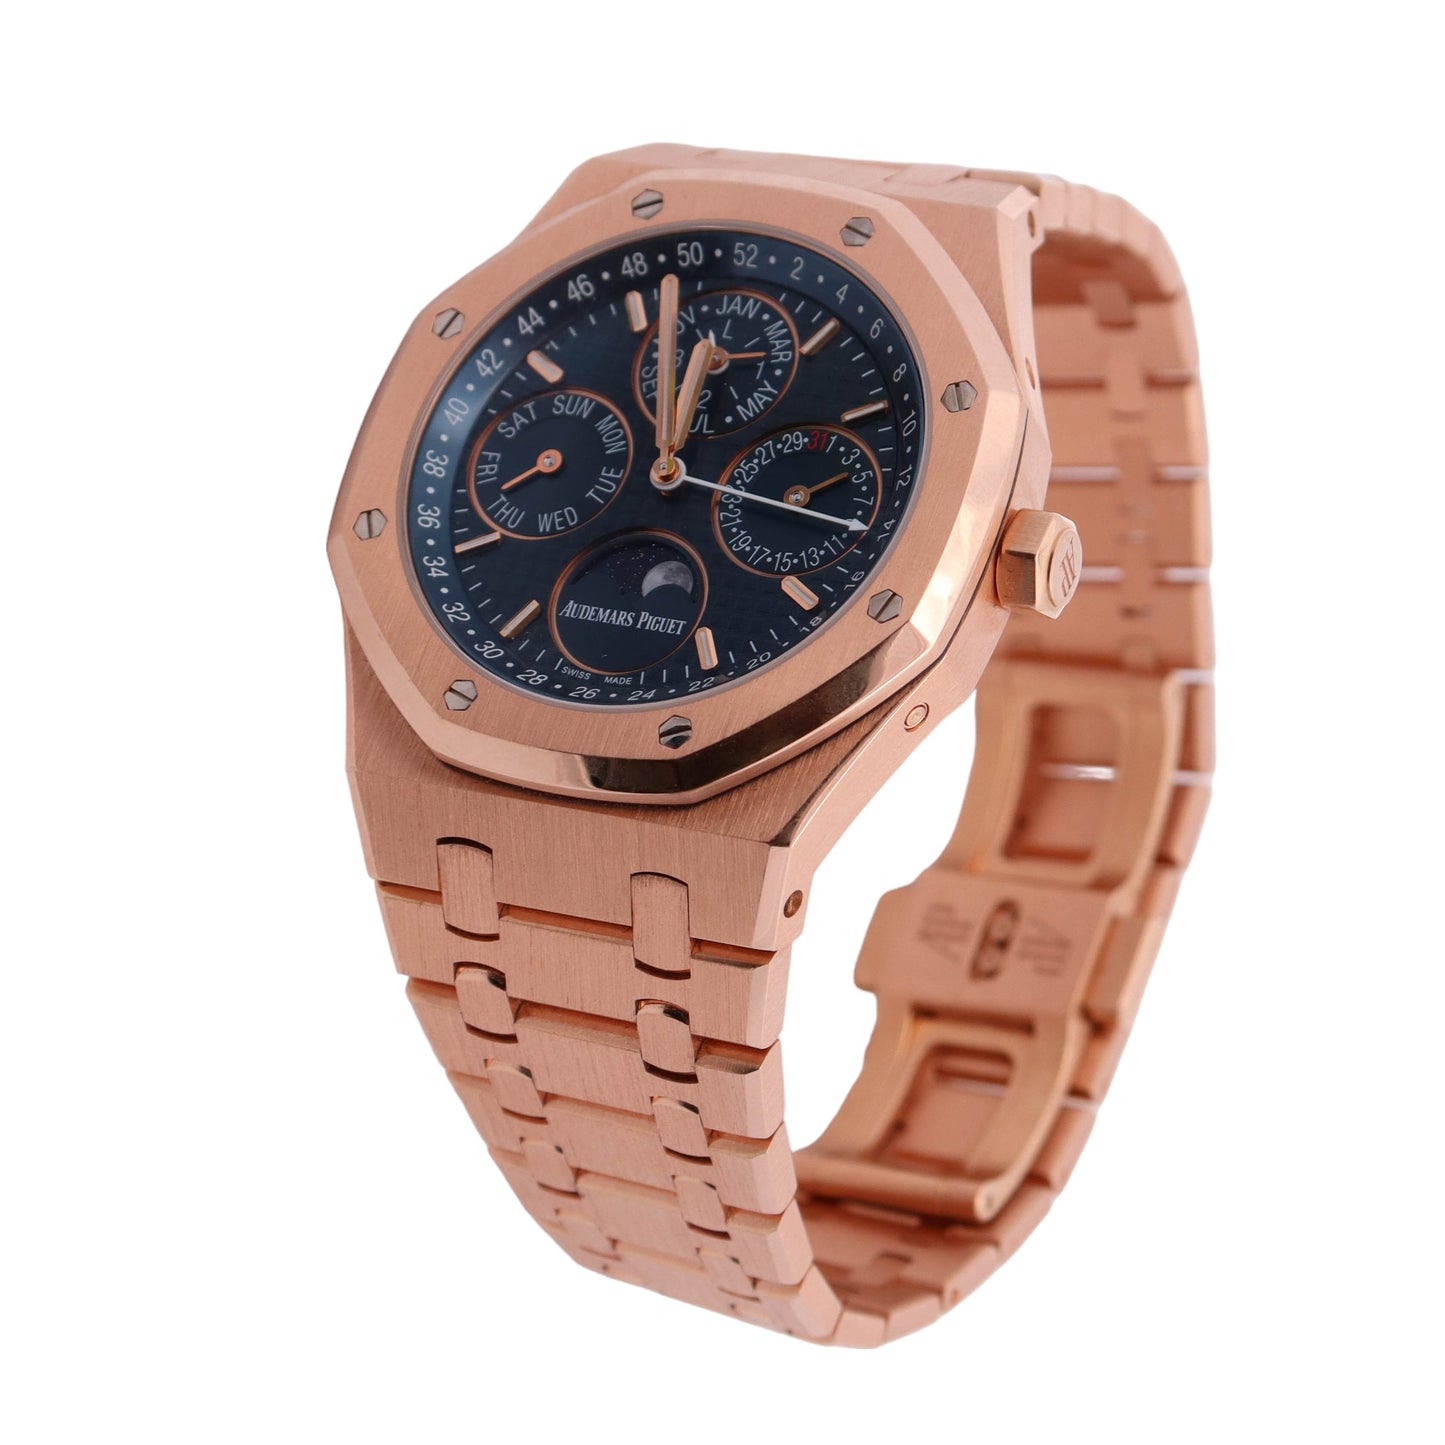 Audemars Piguet Royal Oak Perpetual Calendar Rose Gold Blue Stick Dial Watch Reference #: 26574OR.OO.1220OR.03 - Happy Jewelers Fine Jewelry Lifetime Warranty